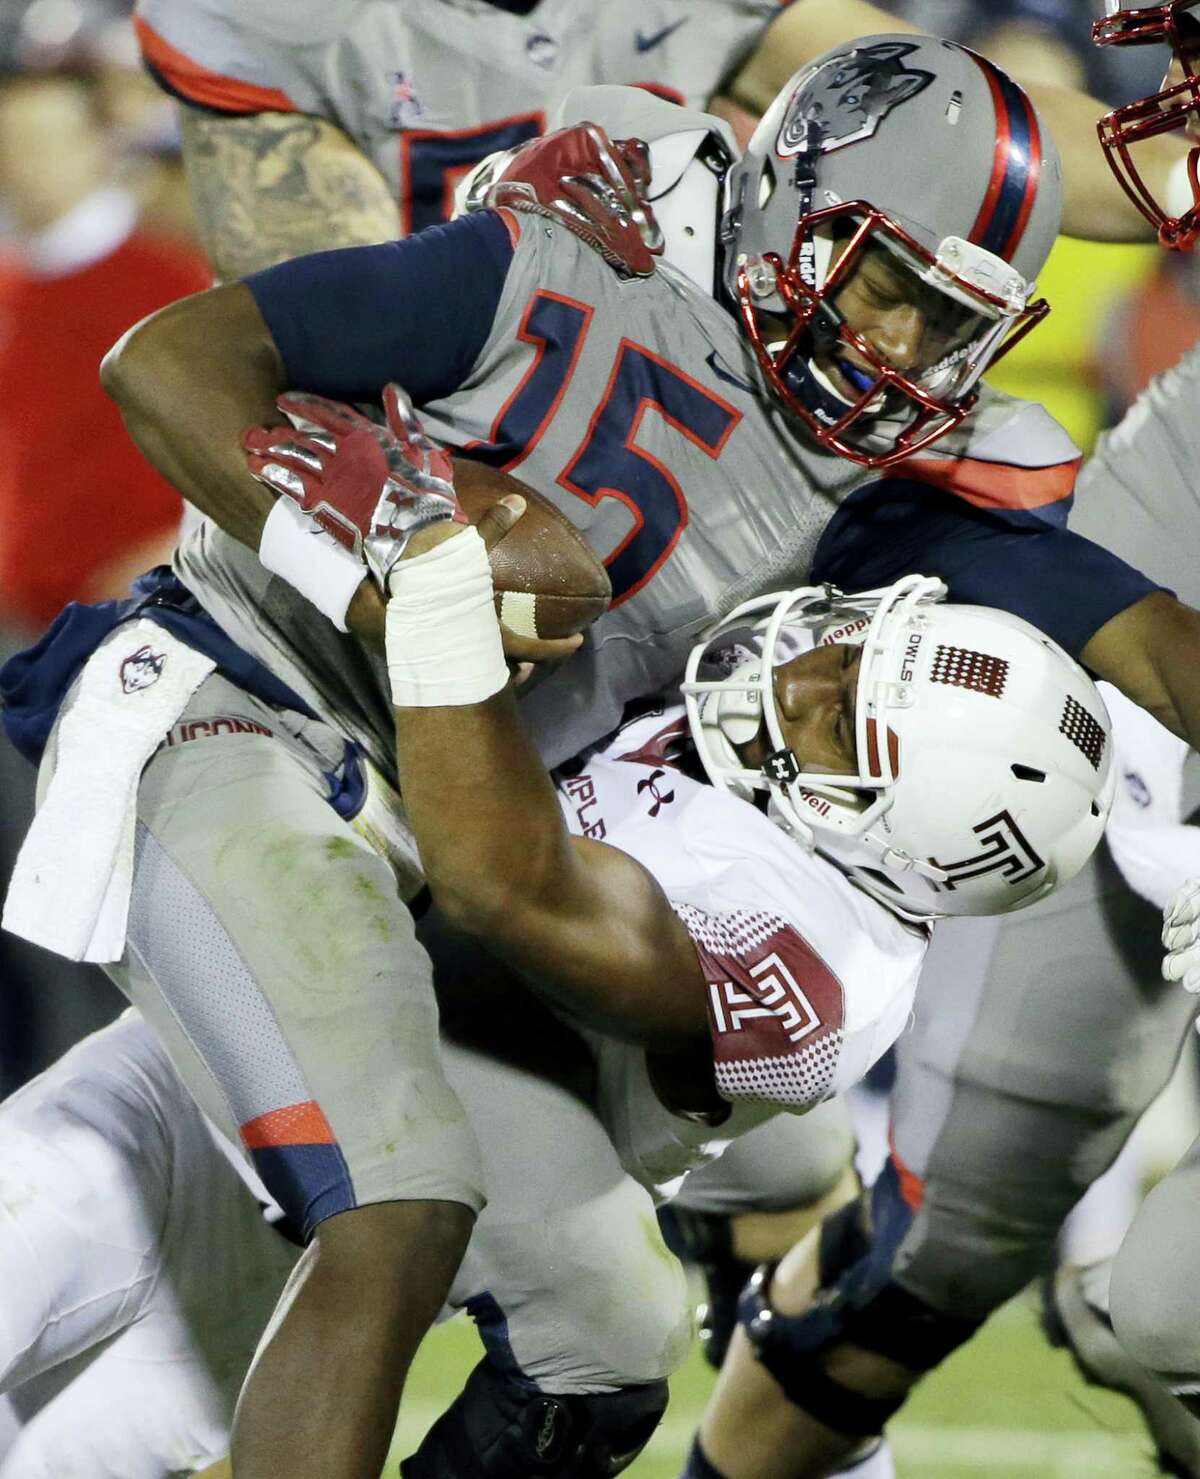 UConn quarterback Donovan Williams is brought down by Temple defensive lineman Haason Reddick during Friday night’s game.